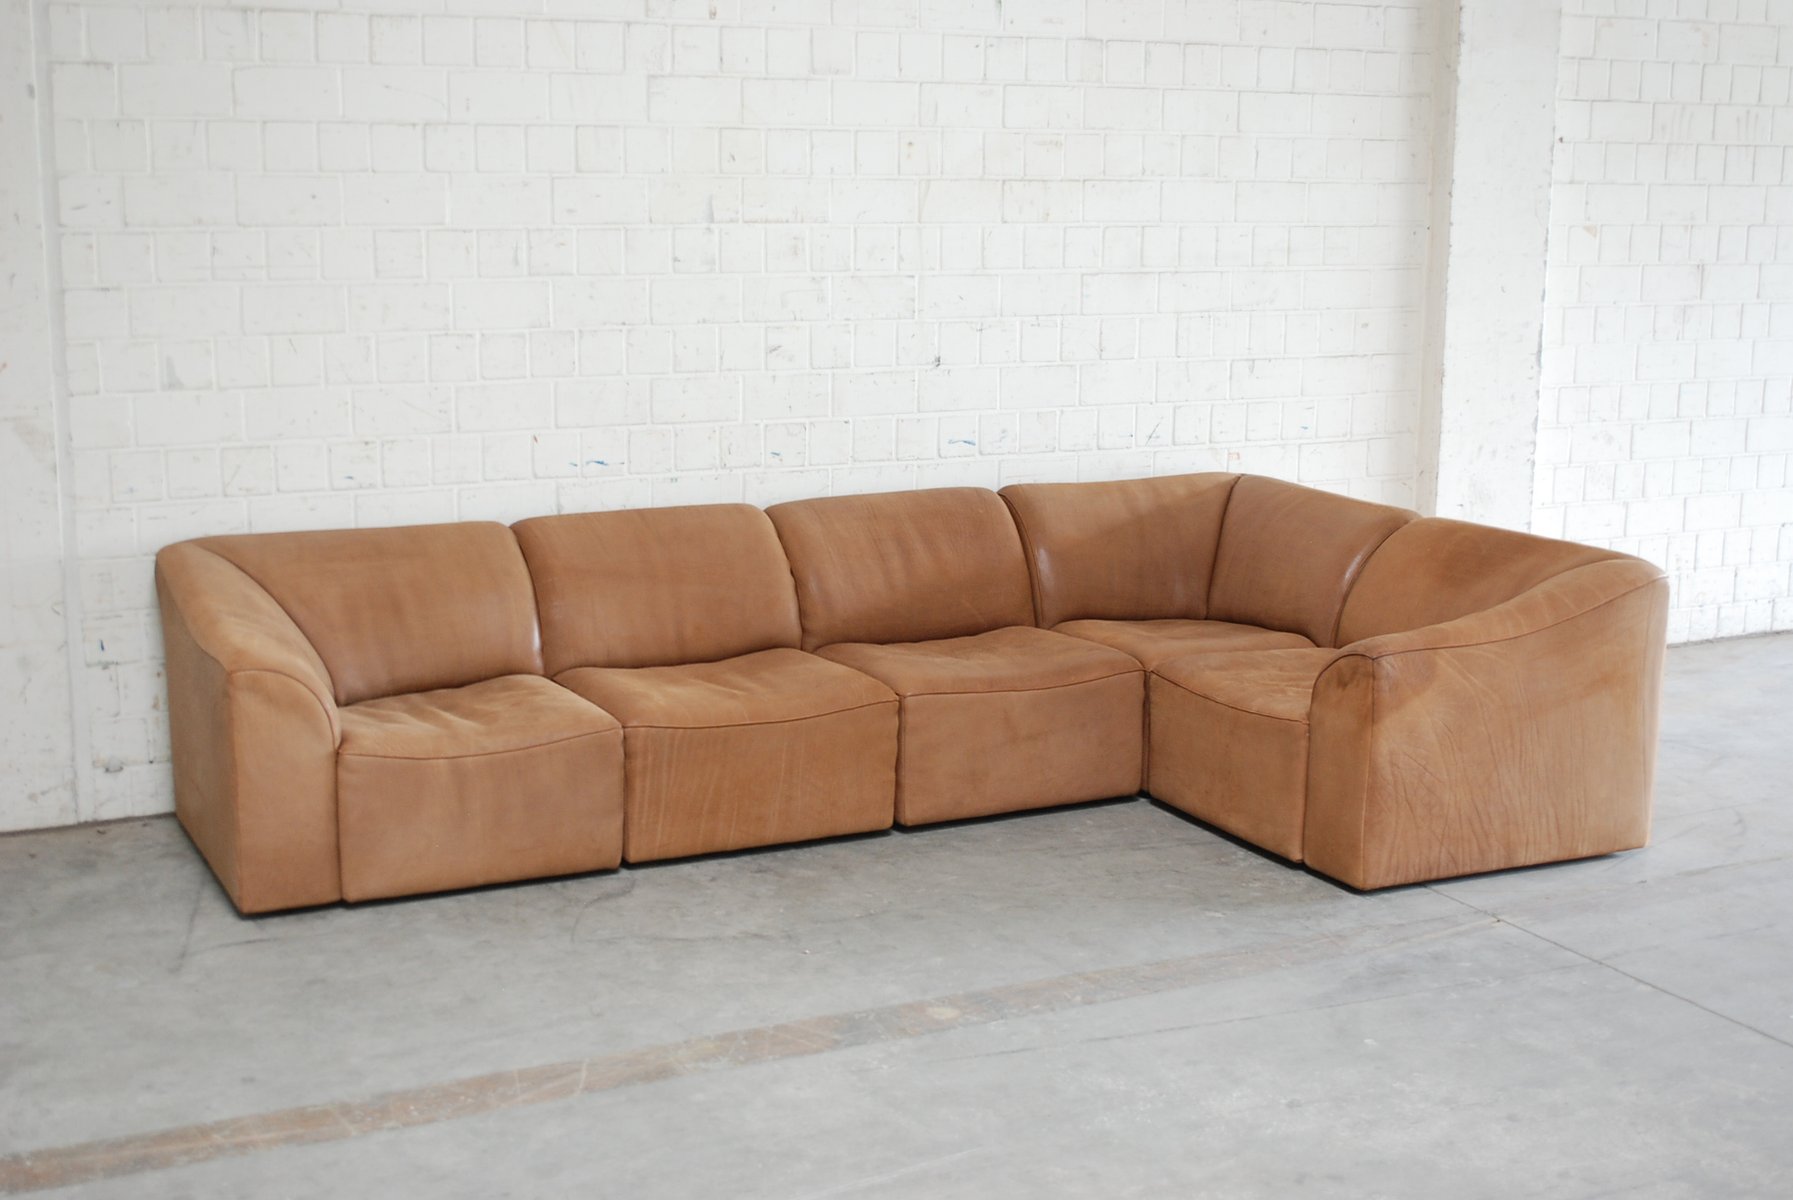 Modular DS 10 Leather Sofa from De Sede for sale at Pamono